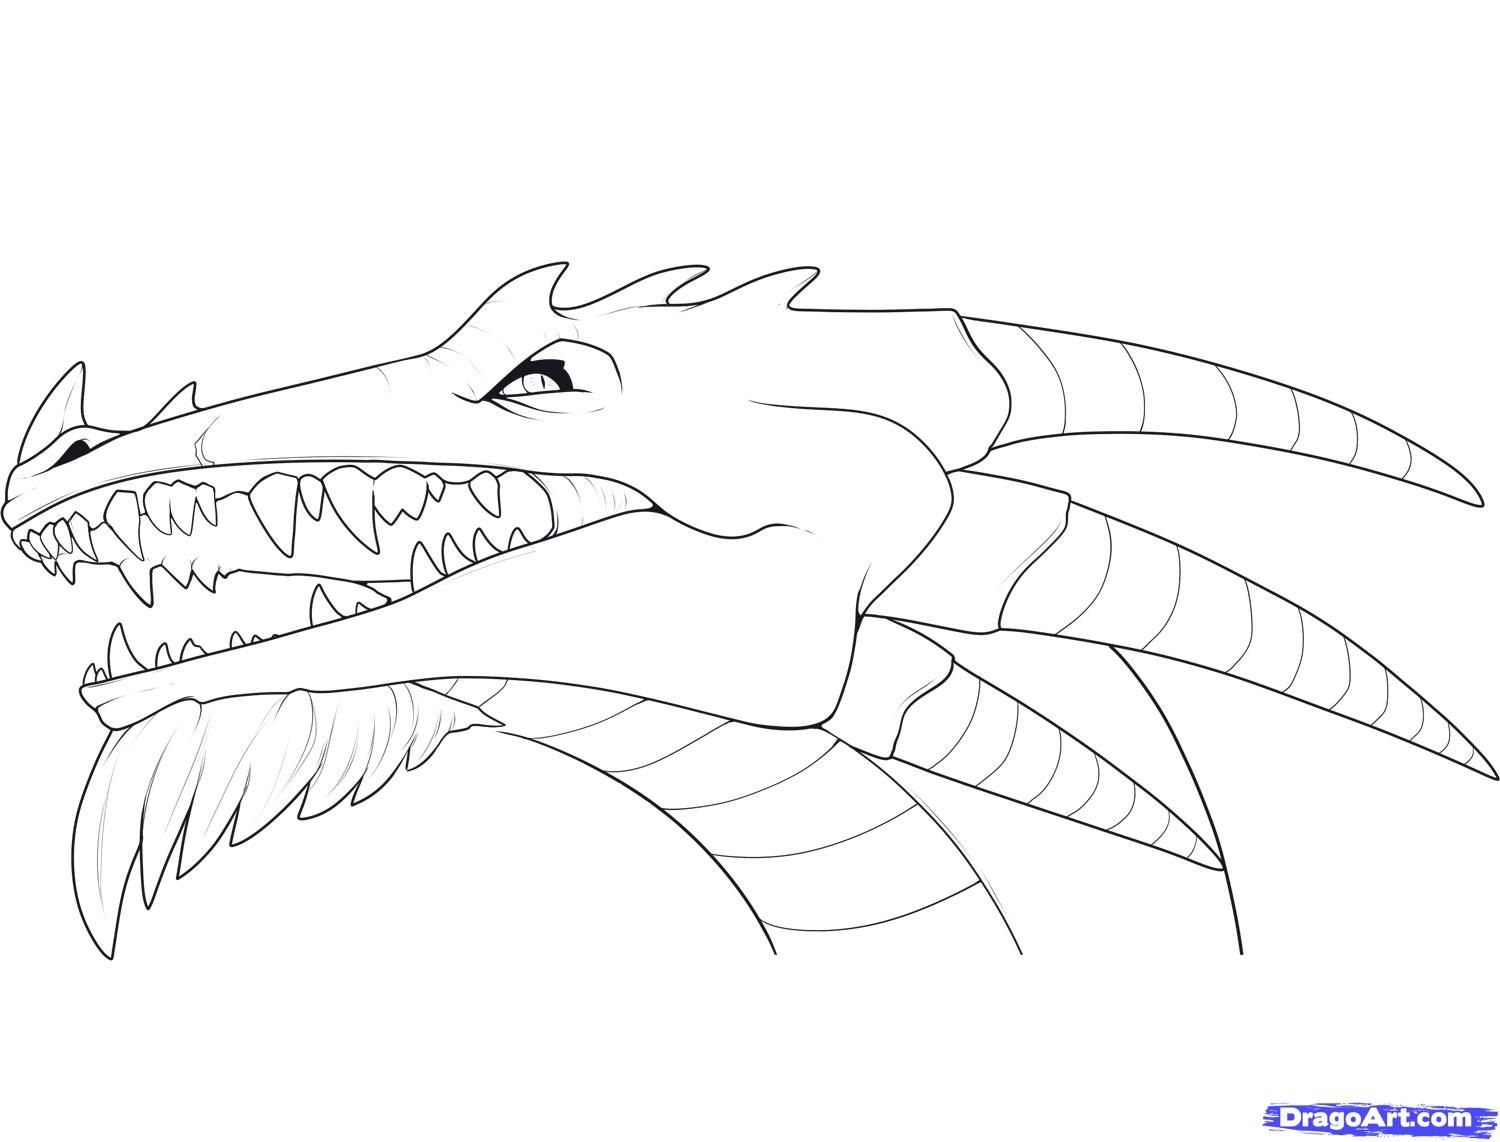 How to Draw Dragon Heads, Step by Step, Dragons, Draw a Dragon ...